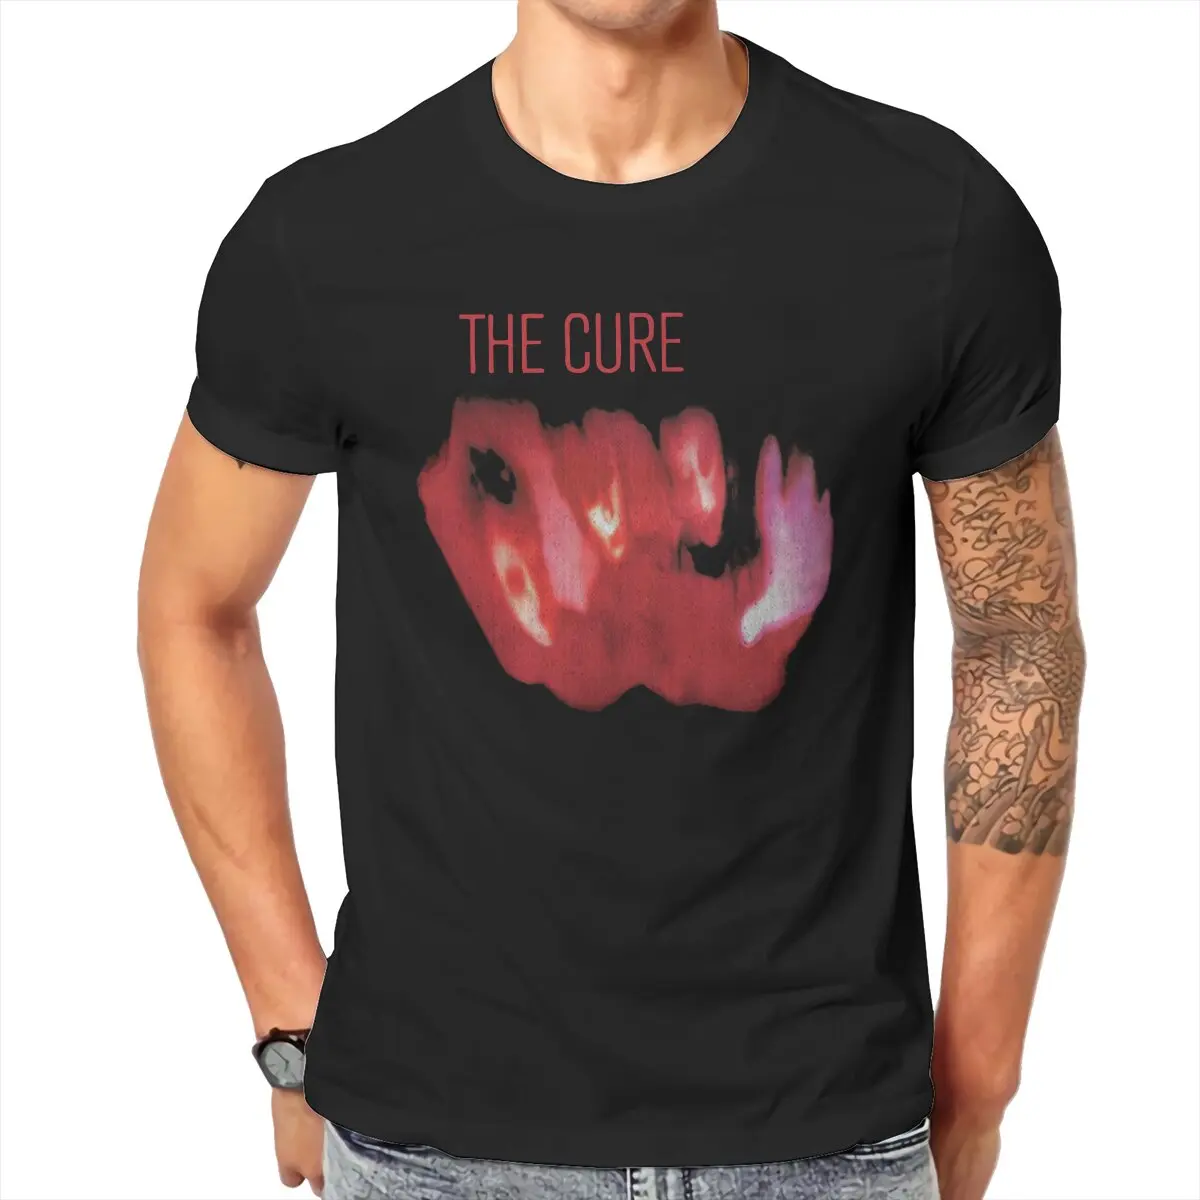 Men's T-Shirts Absurd Red The Cure  Amazing Cotton Tees Short Sleeve Punk Music Band T Shirt O Neck Clothes 6XL